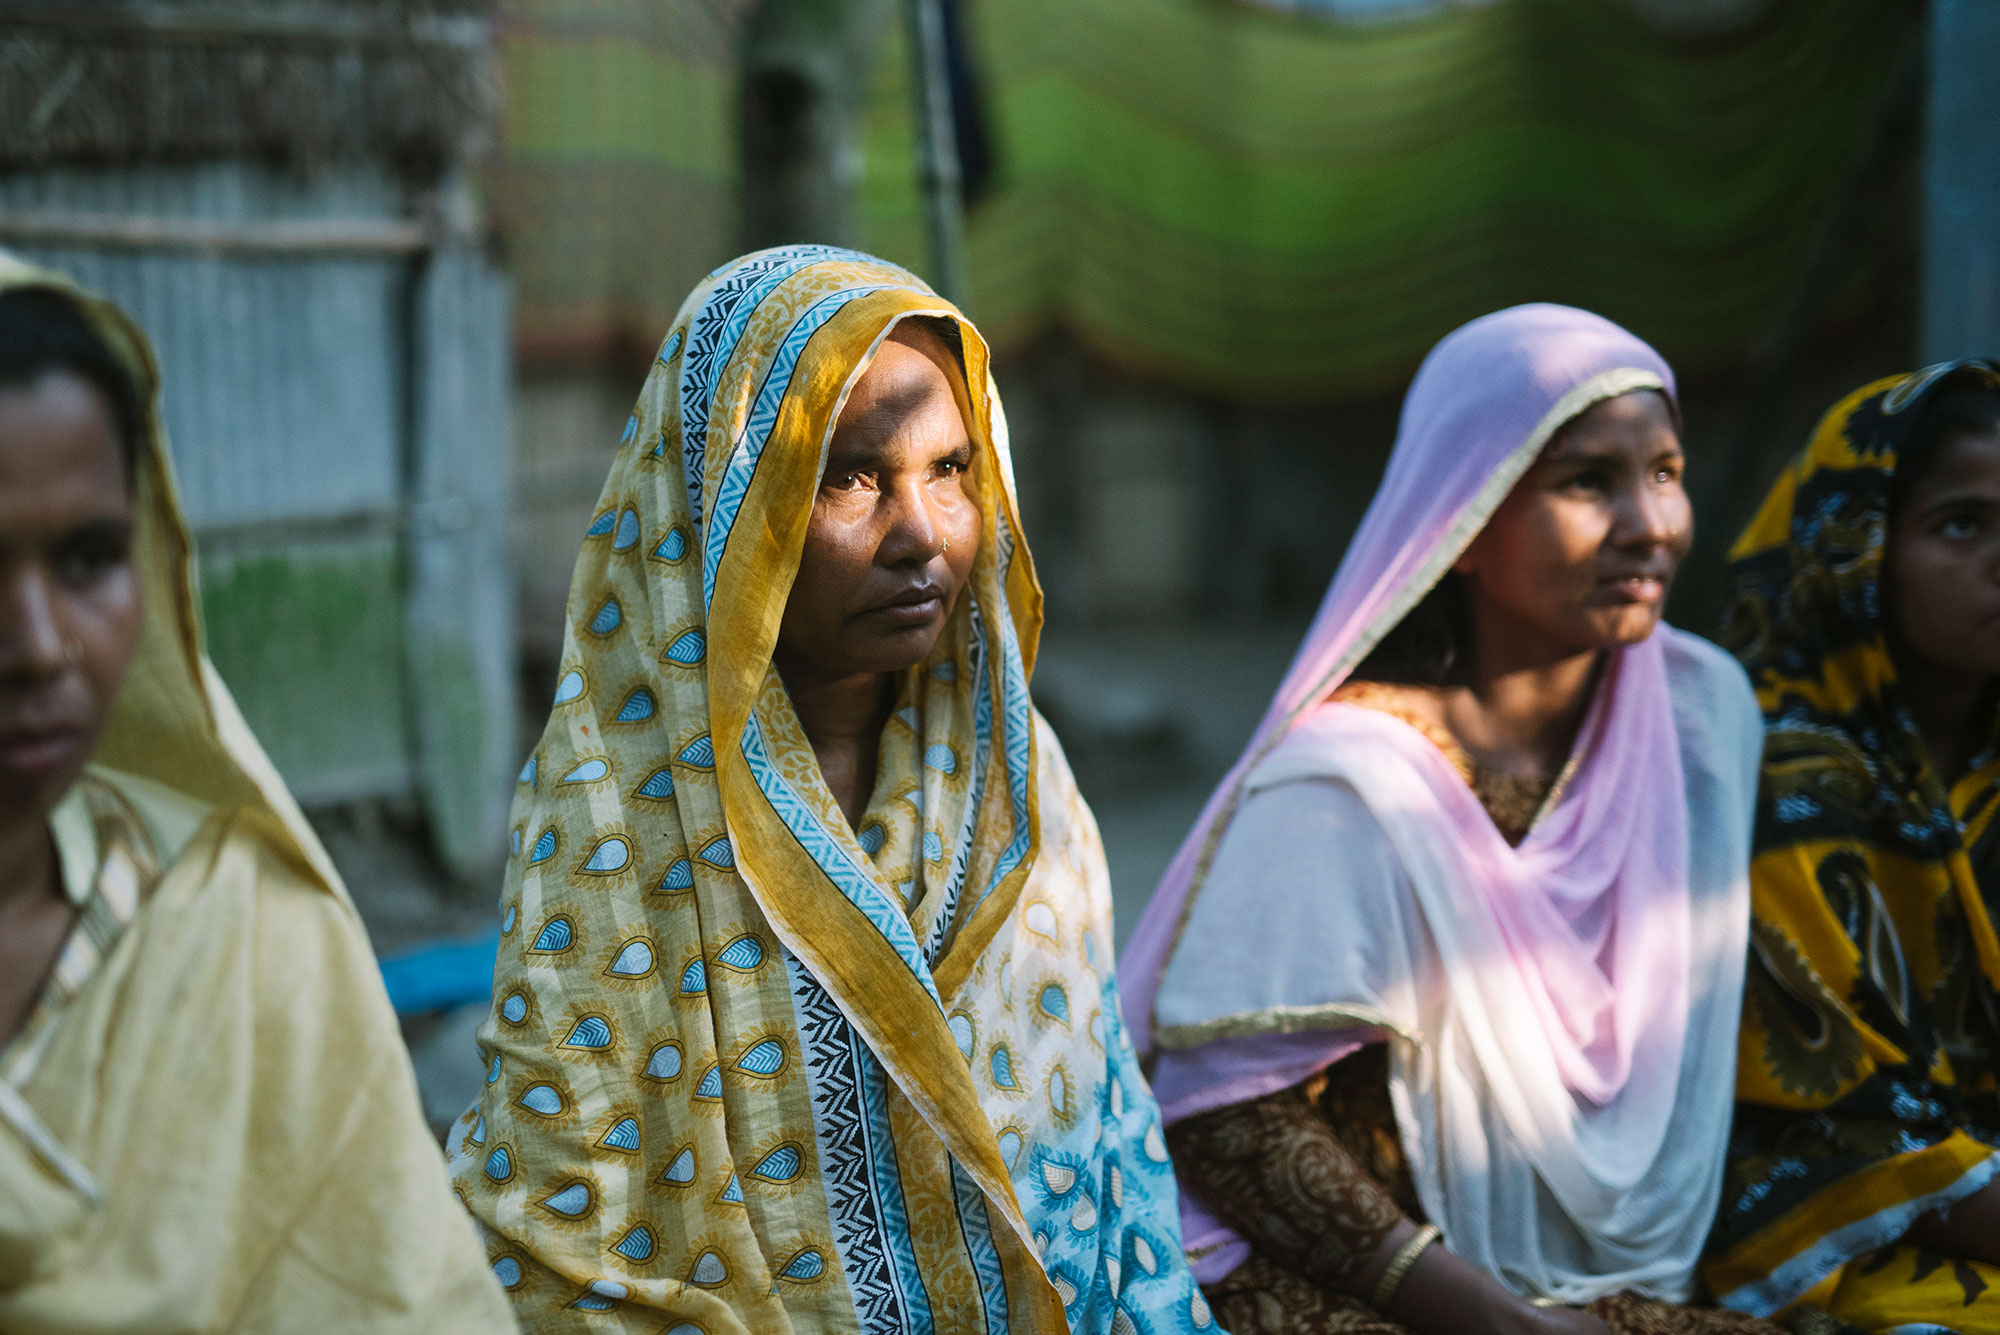 Women in Bangladesh meet as part of BRAC's Human Rights and Legal Services program